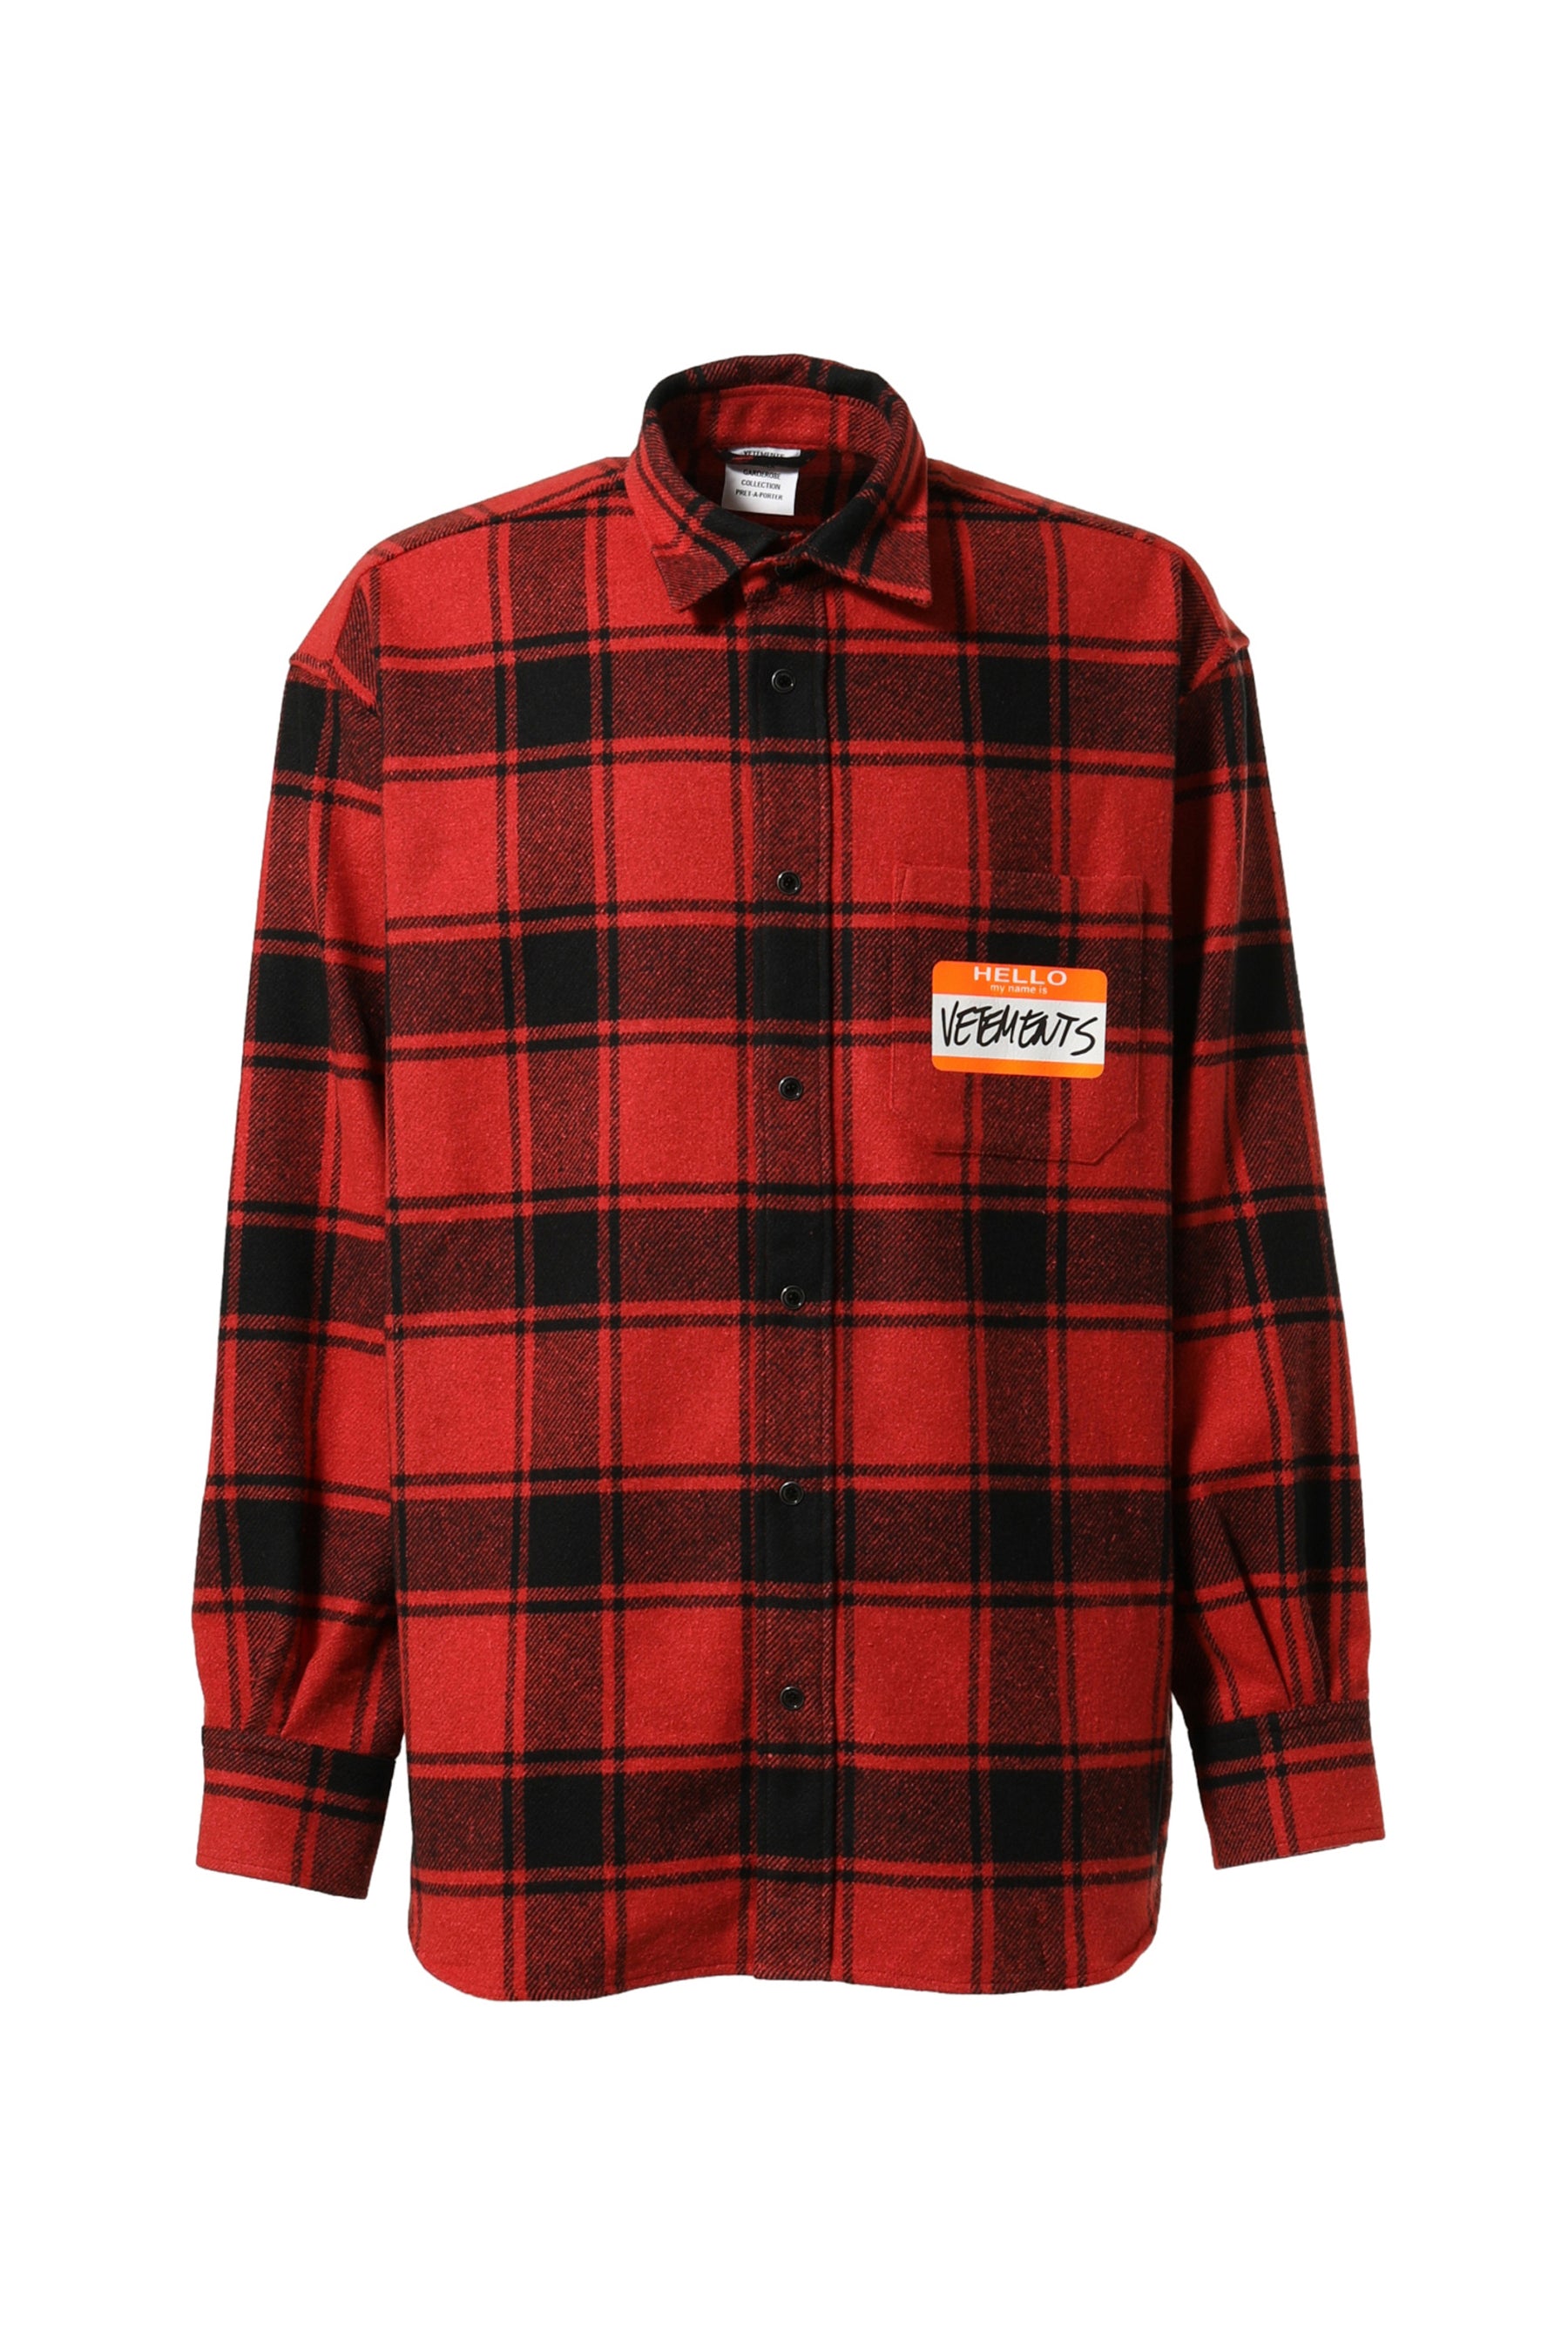 VETEMENTS ヴェトモン FW23 MY NAME IS VETEMENTS FLANNEL SHIRT / RED ...